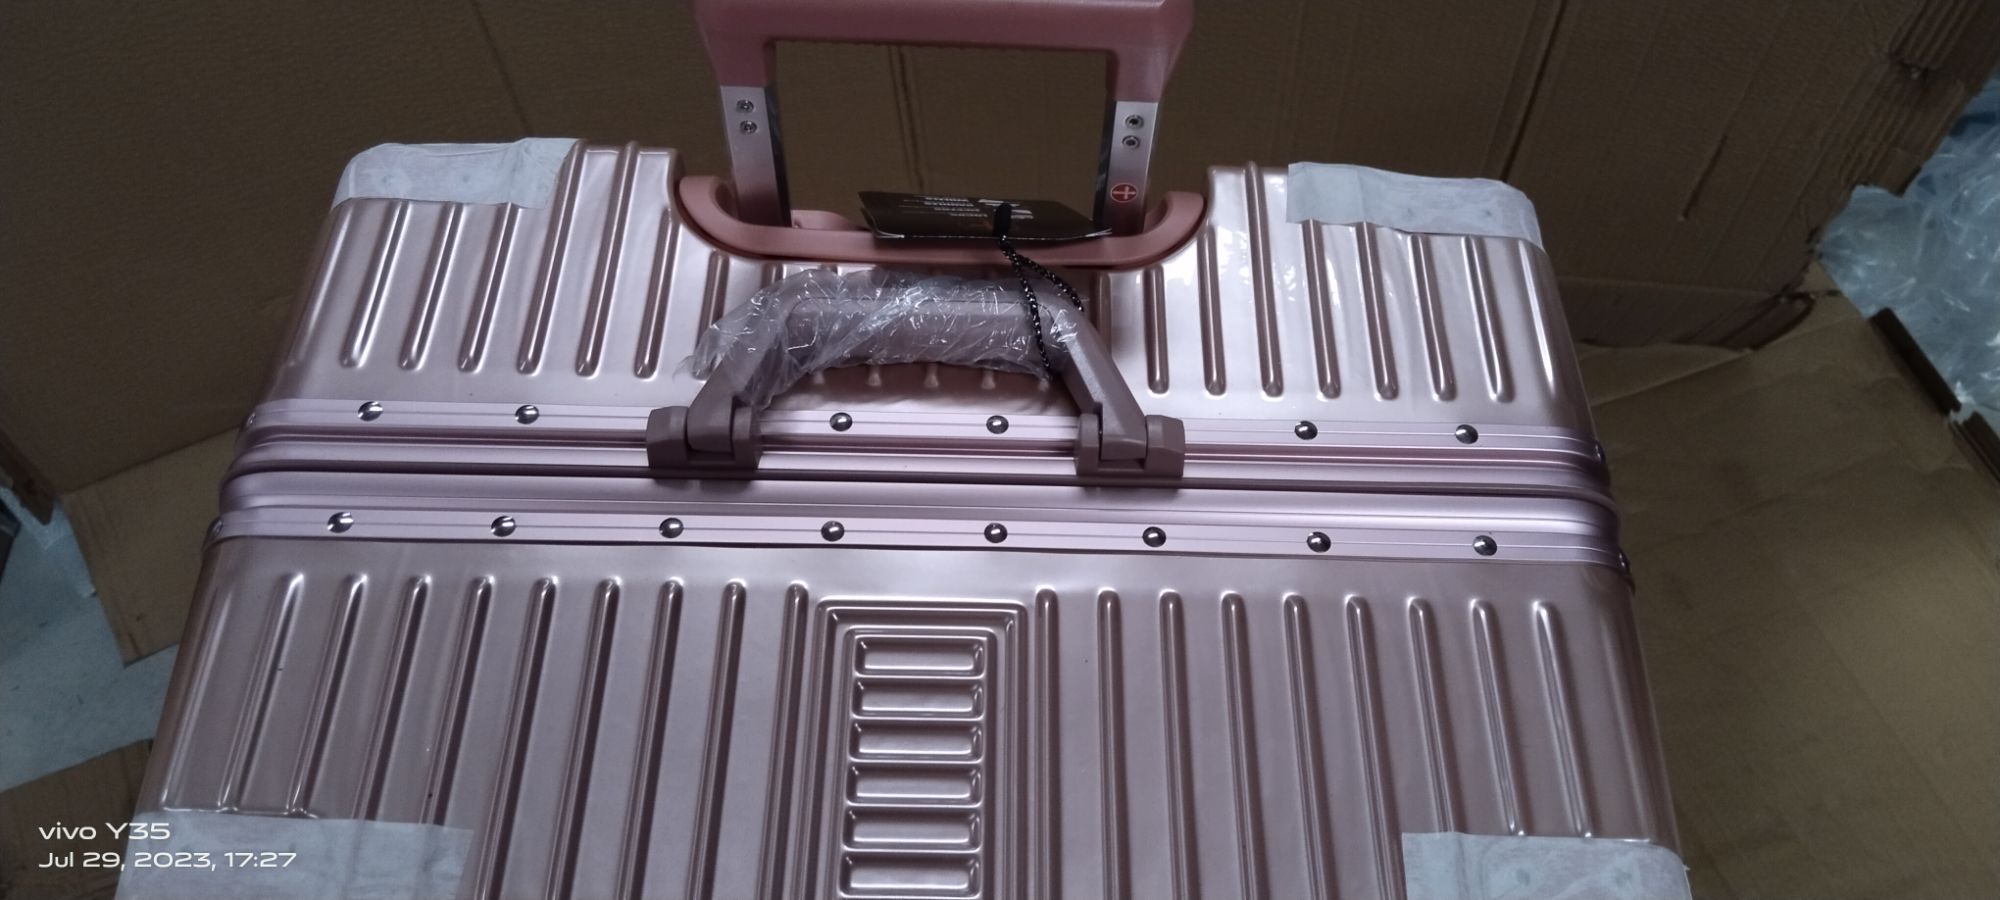 LUGGAGE PC RIMOWA)3in1)202428 inches ALUMINUM ALLOY FRAME CLIPTYPE LOCK  TSA LOCK SCRATCH RESISTANT